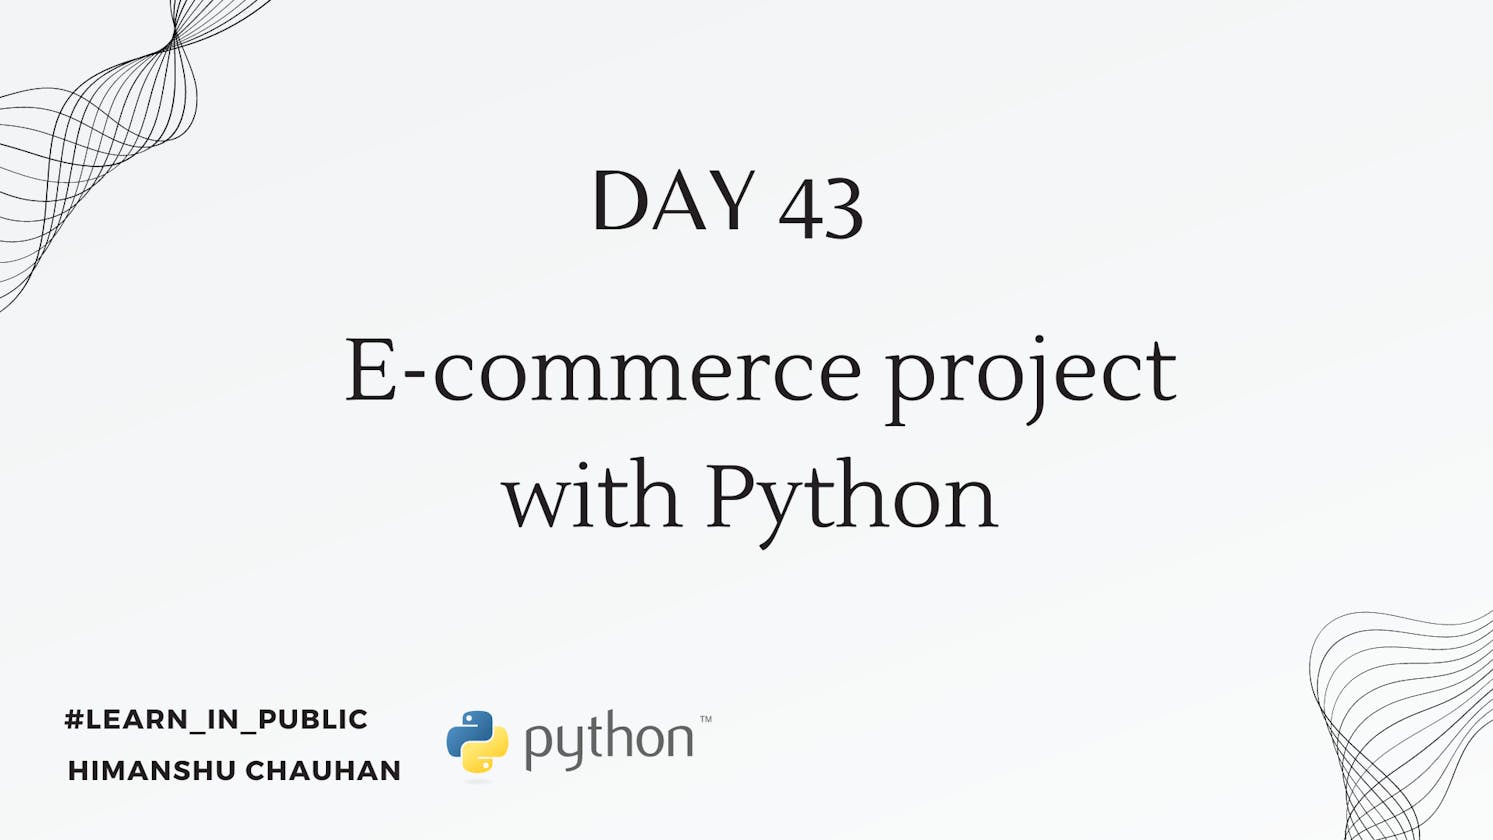 Day 43: E-commerce project with Python